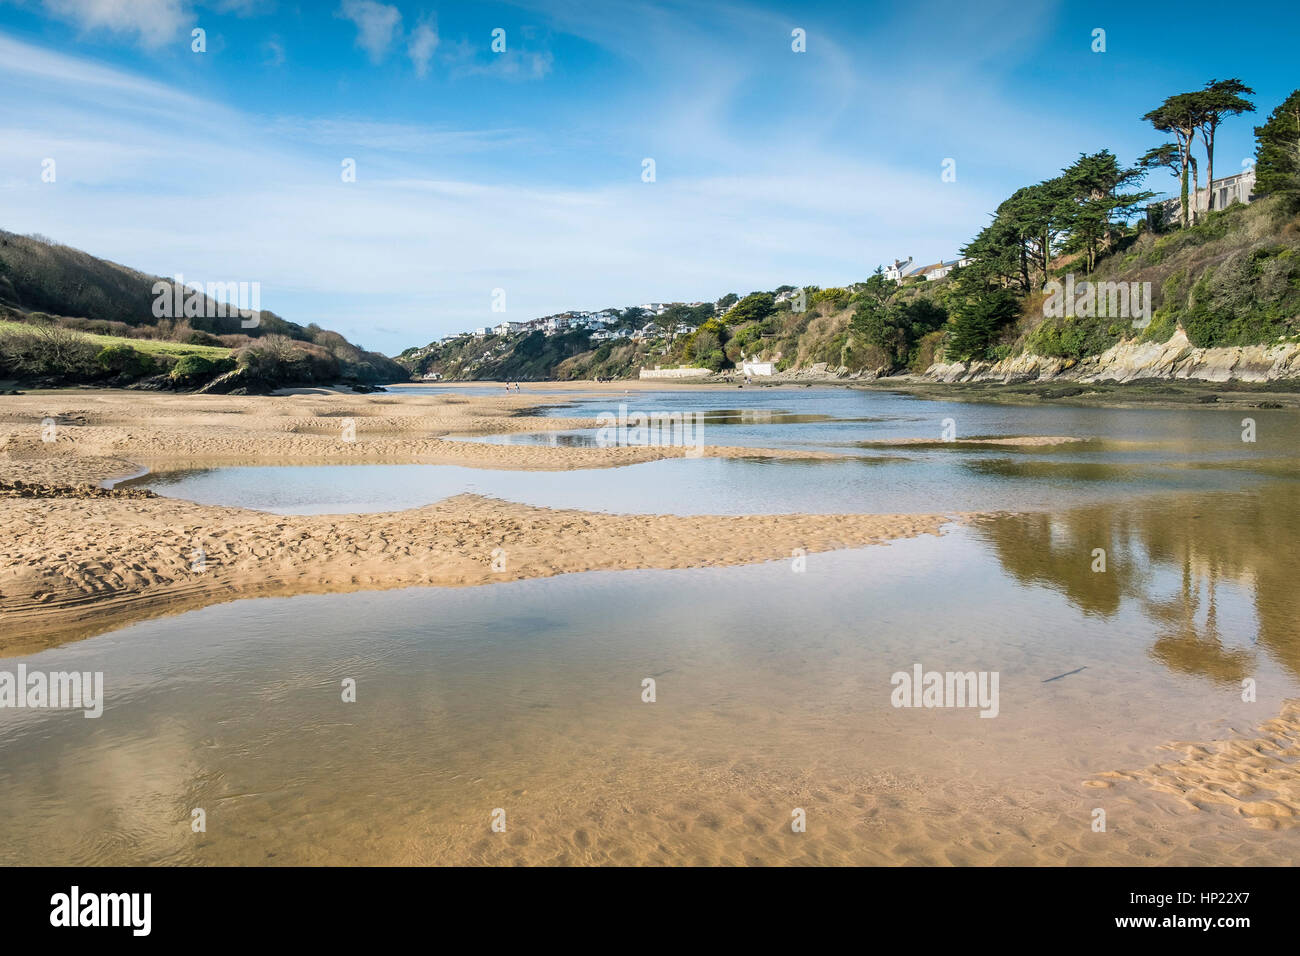 Sandbanks exposed at low tide on the Gannel Estuary. Newquay, Cornwall, UK. Stock Photo